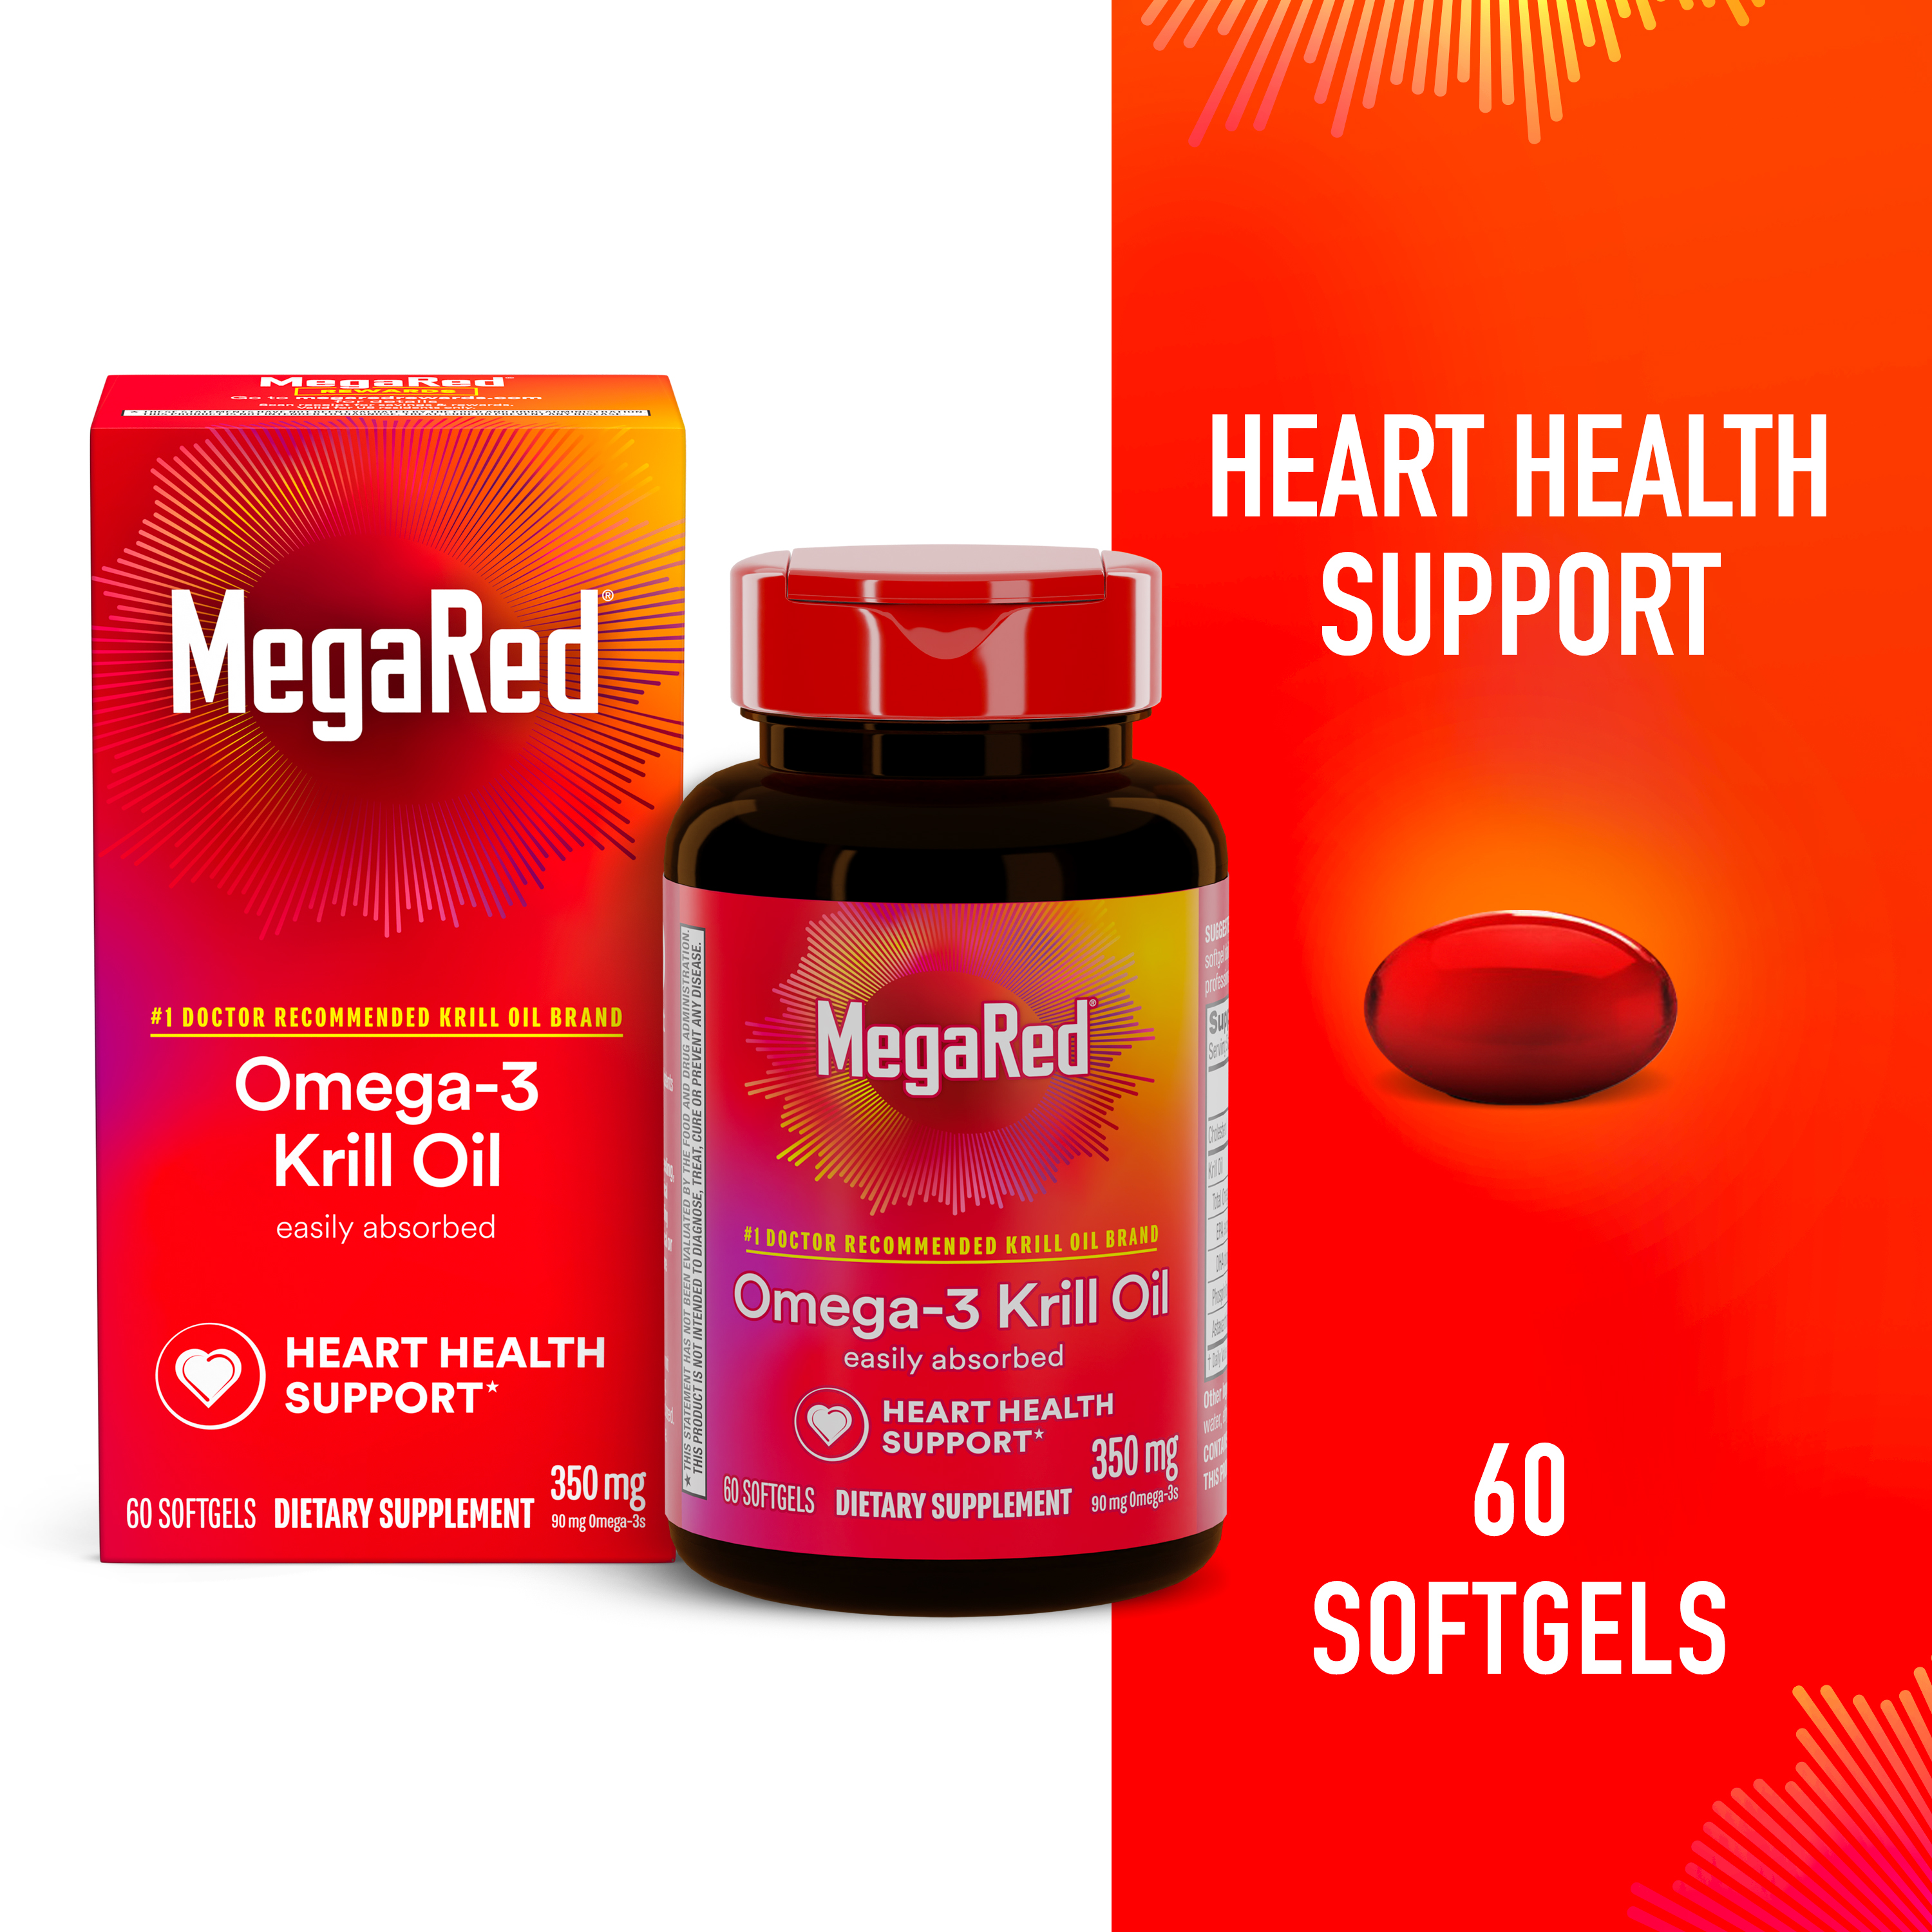 MegaRed 350mg Superior Omega-3s Krill Oil, 60 Softgels - image 1 of 14